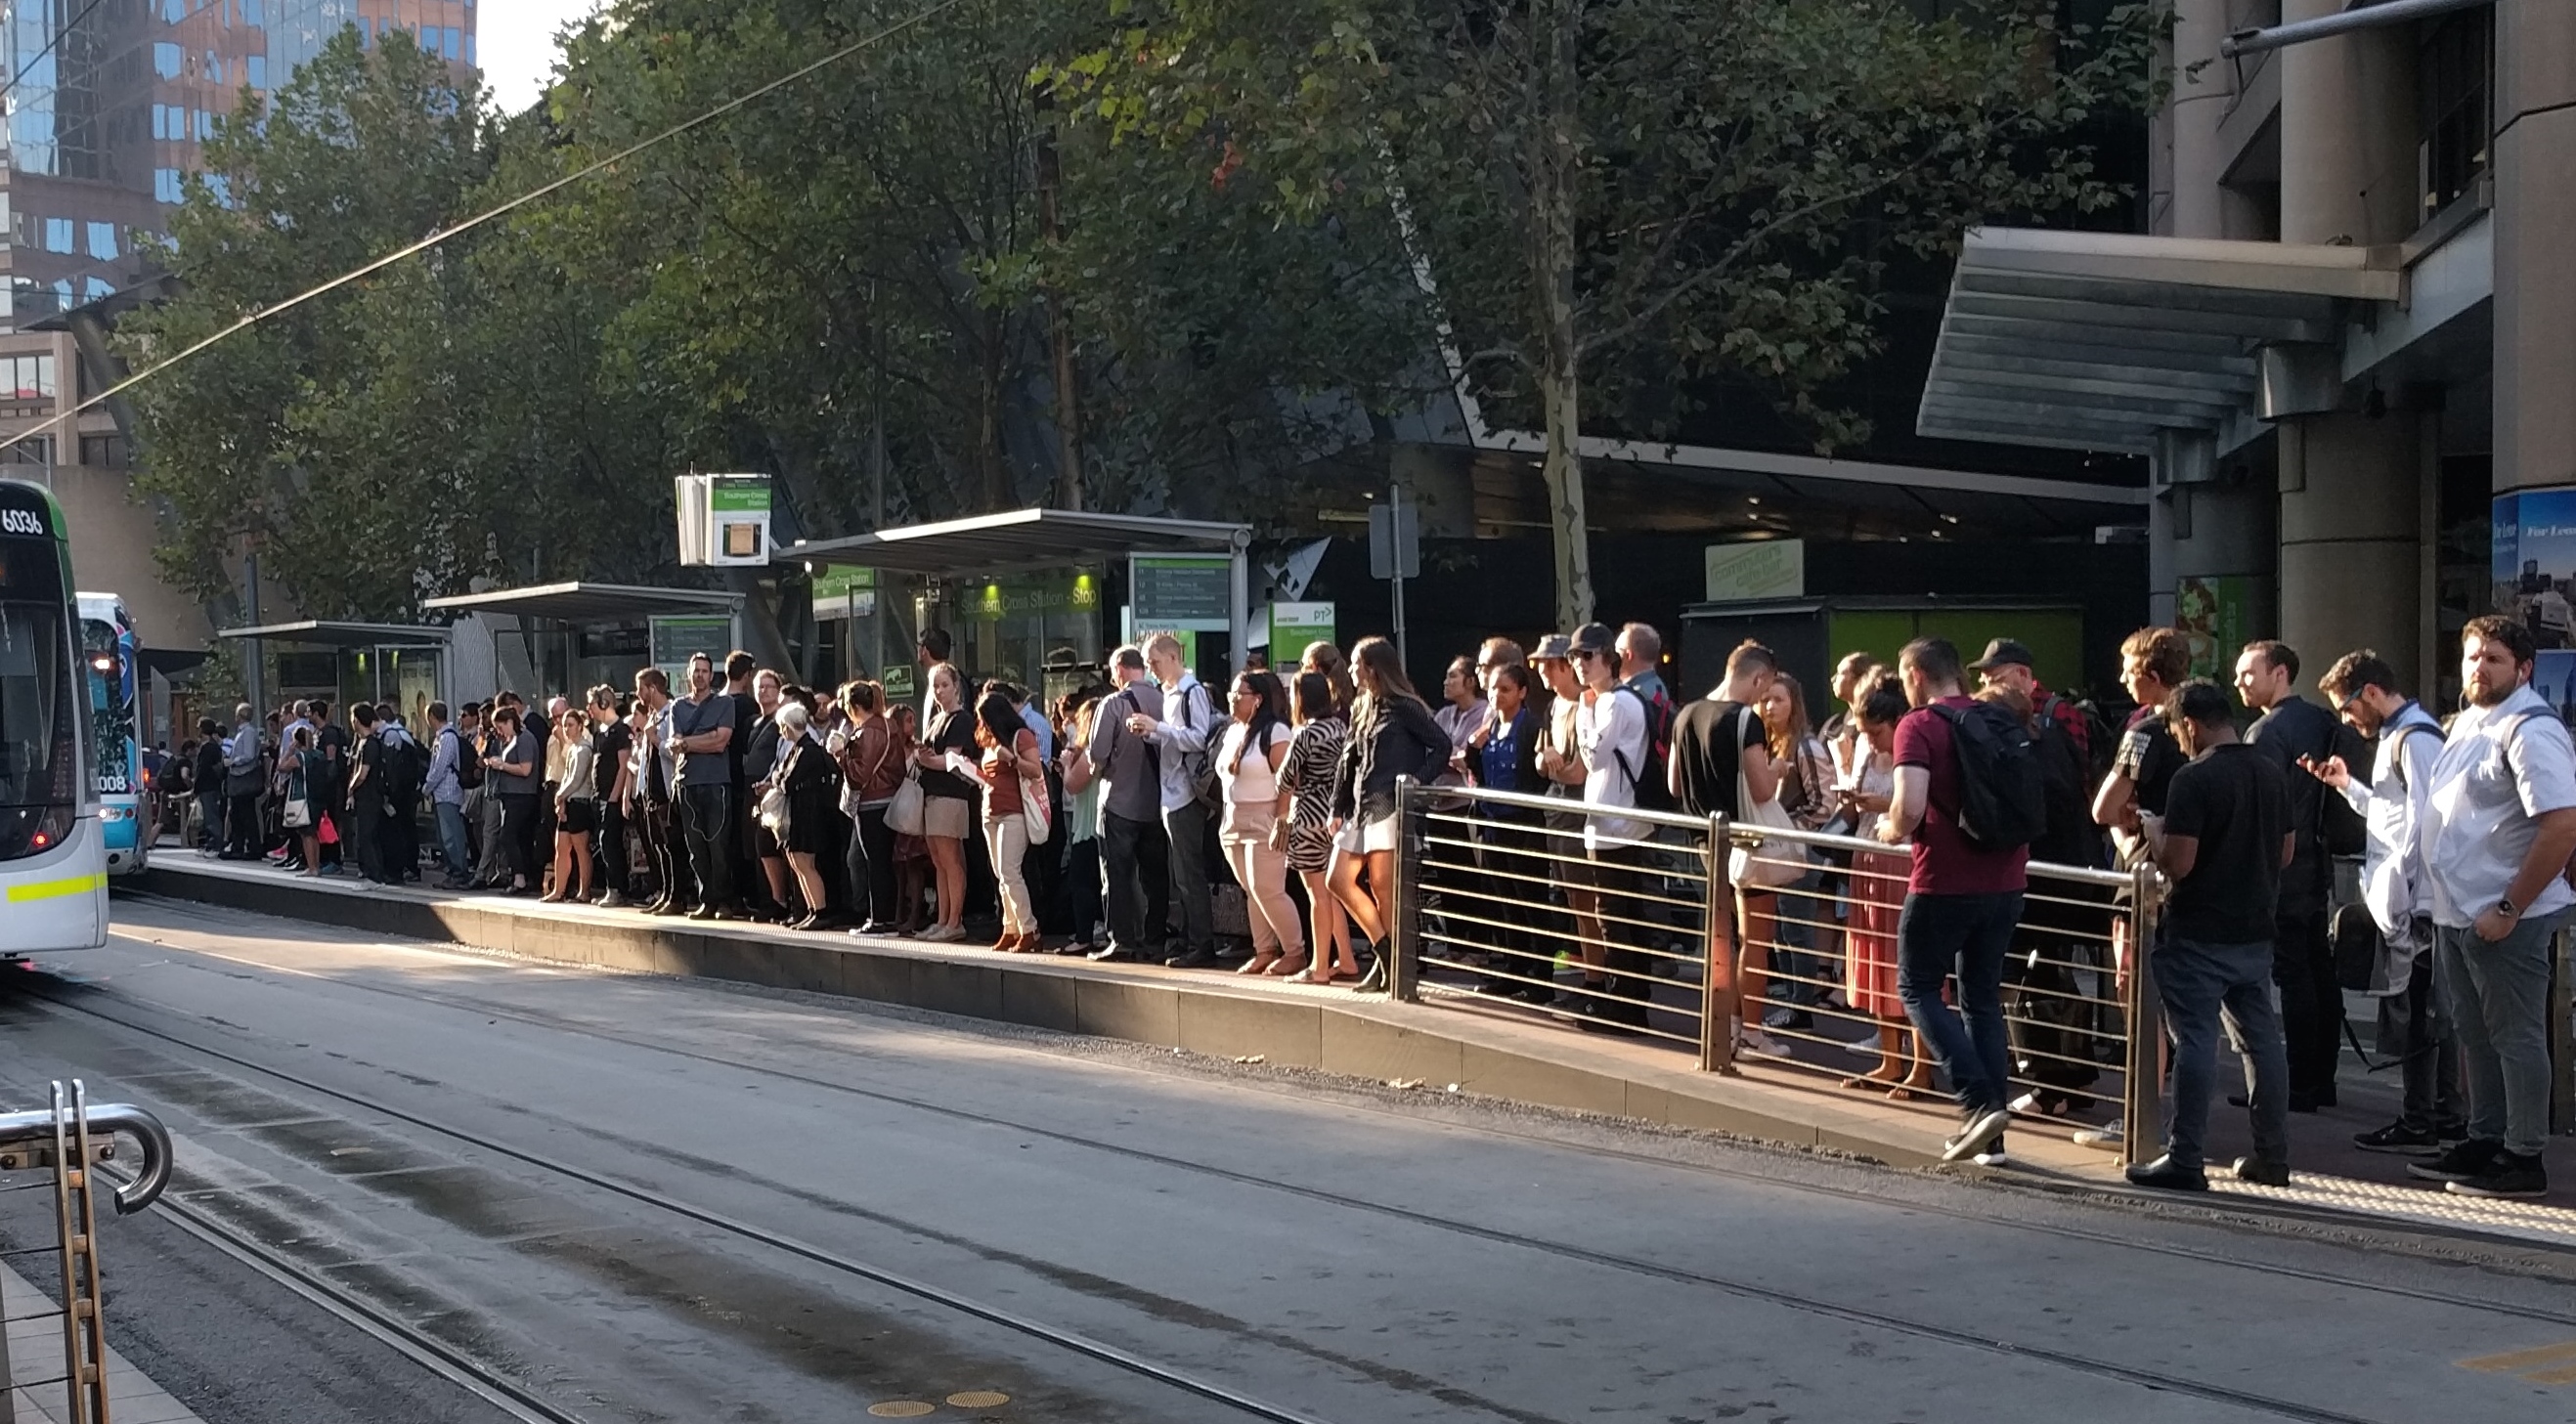 Crowded tram stop